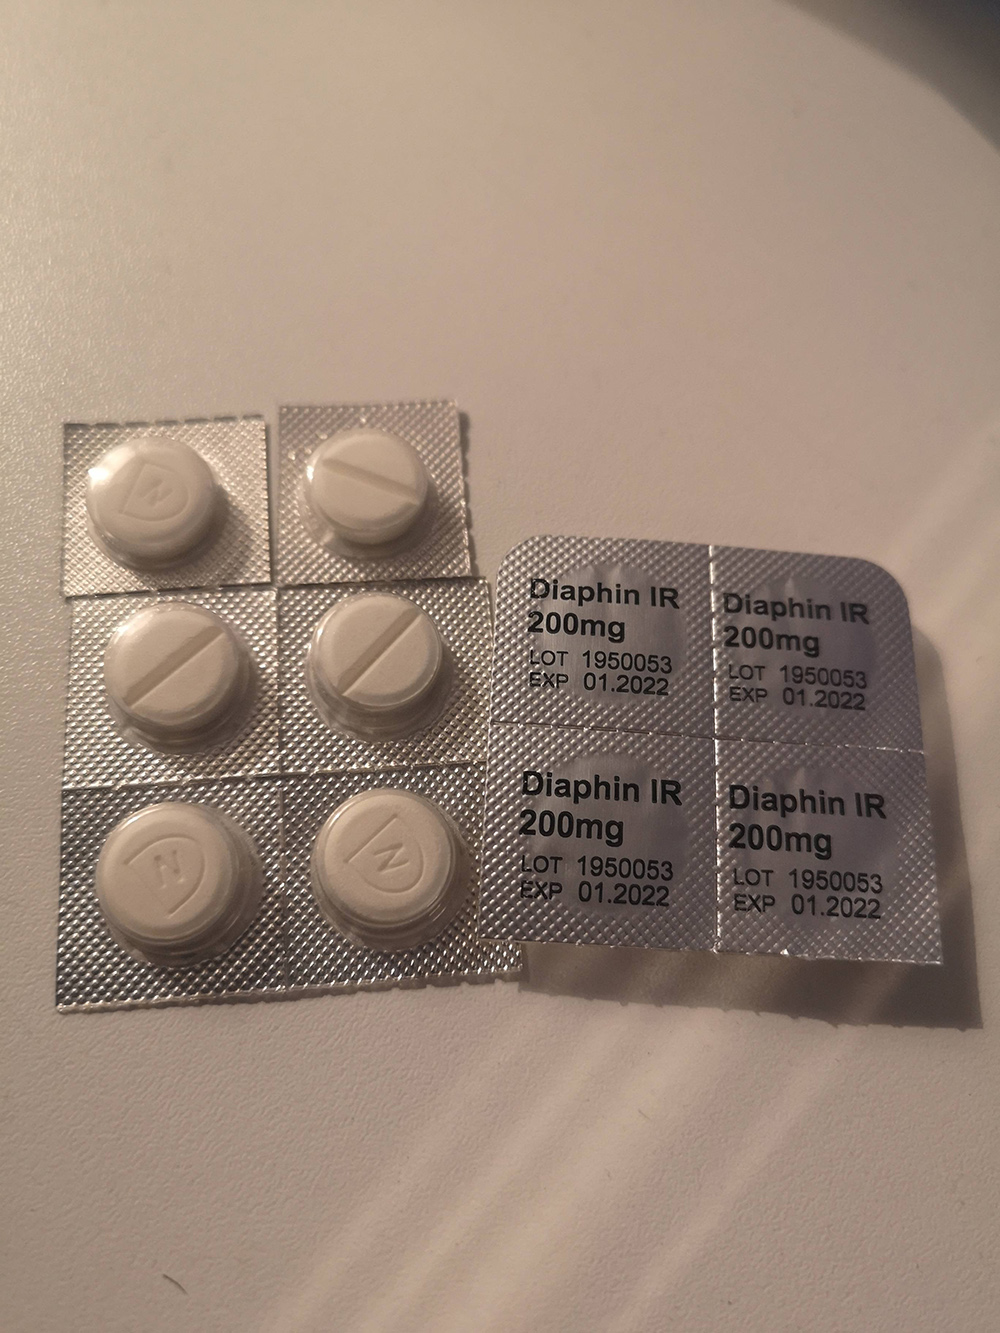 Diaphin 200mg for Sale – 100% Diacetylmorphine